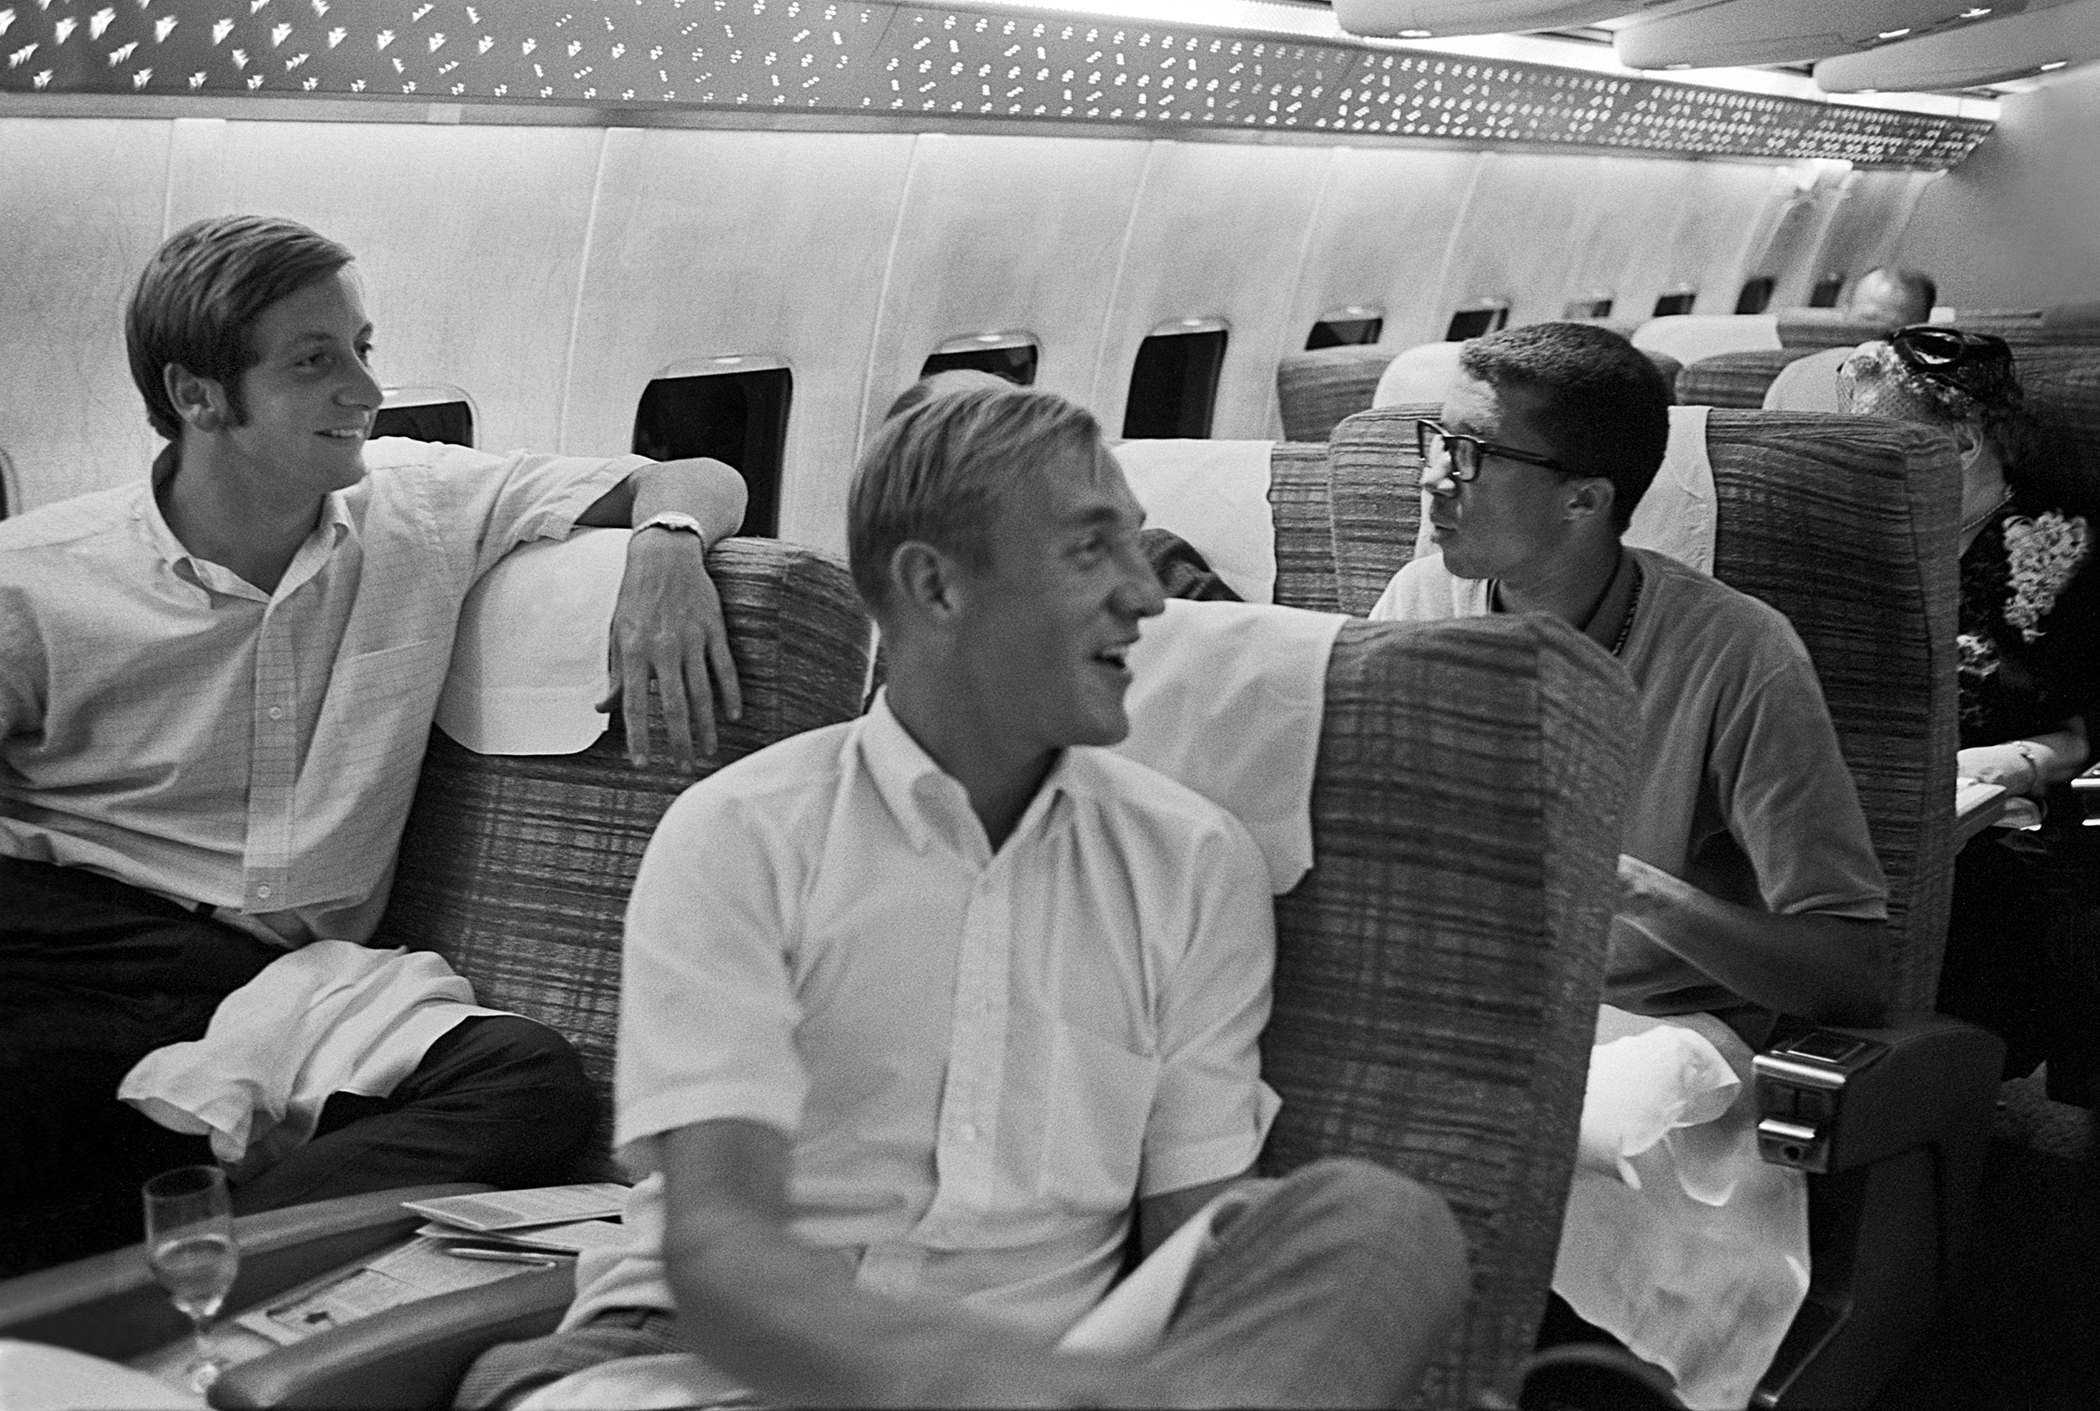 American Davis Cup team members Bob Lutz (left), Stan Smith (center) and Arthur Ashe aboard a flight to Las Vegas for Davis Cup exhibition play, September 10, 1968.  Earlier in the day, Smith and Lutz won their first Grand Slam doubles title at the US Open, defeating Davis Cup teammate Ashe and his partner, Andrés Gimeno, in the final. Photo by John G. Zimmerman.